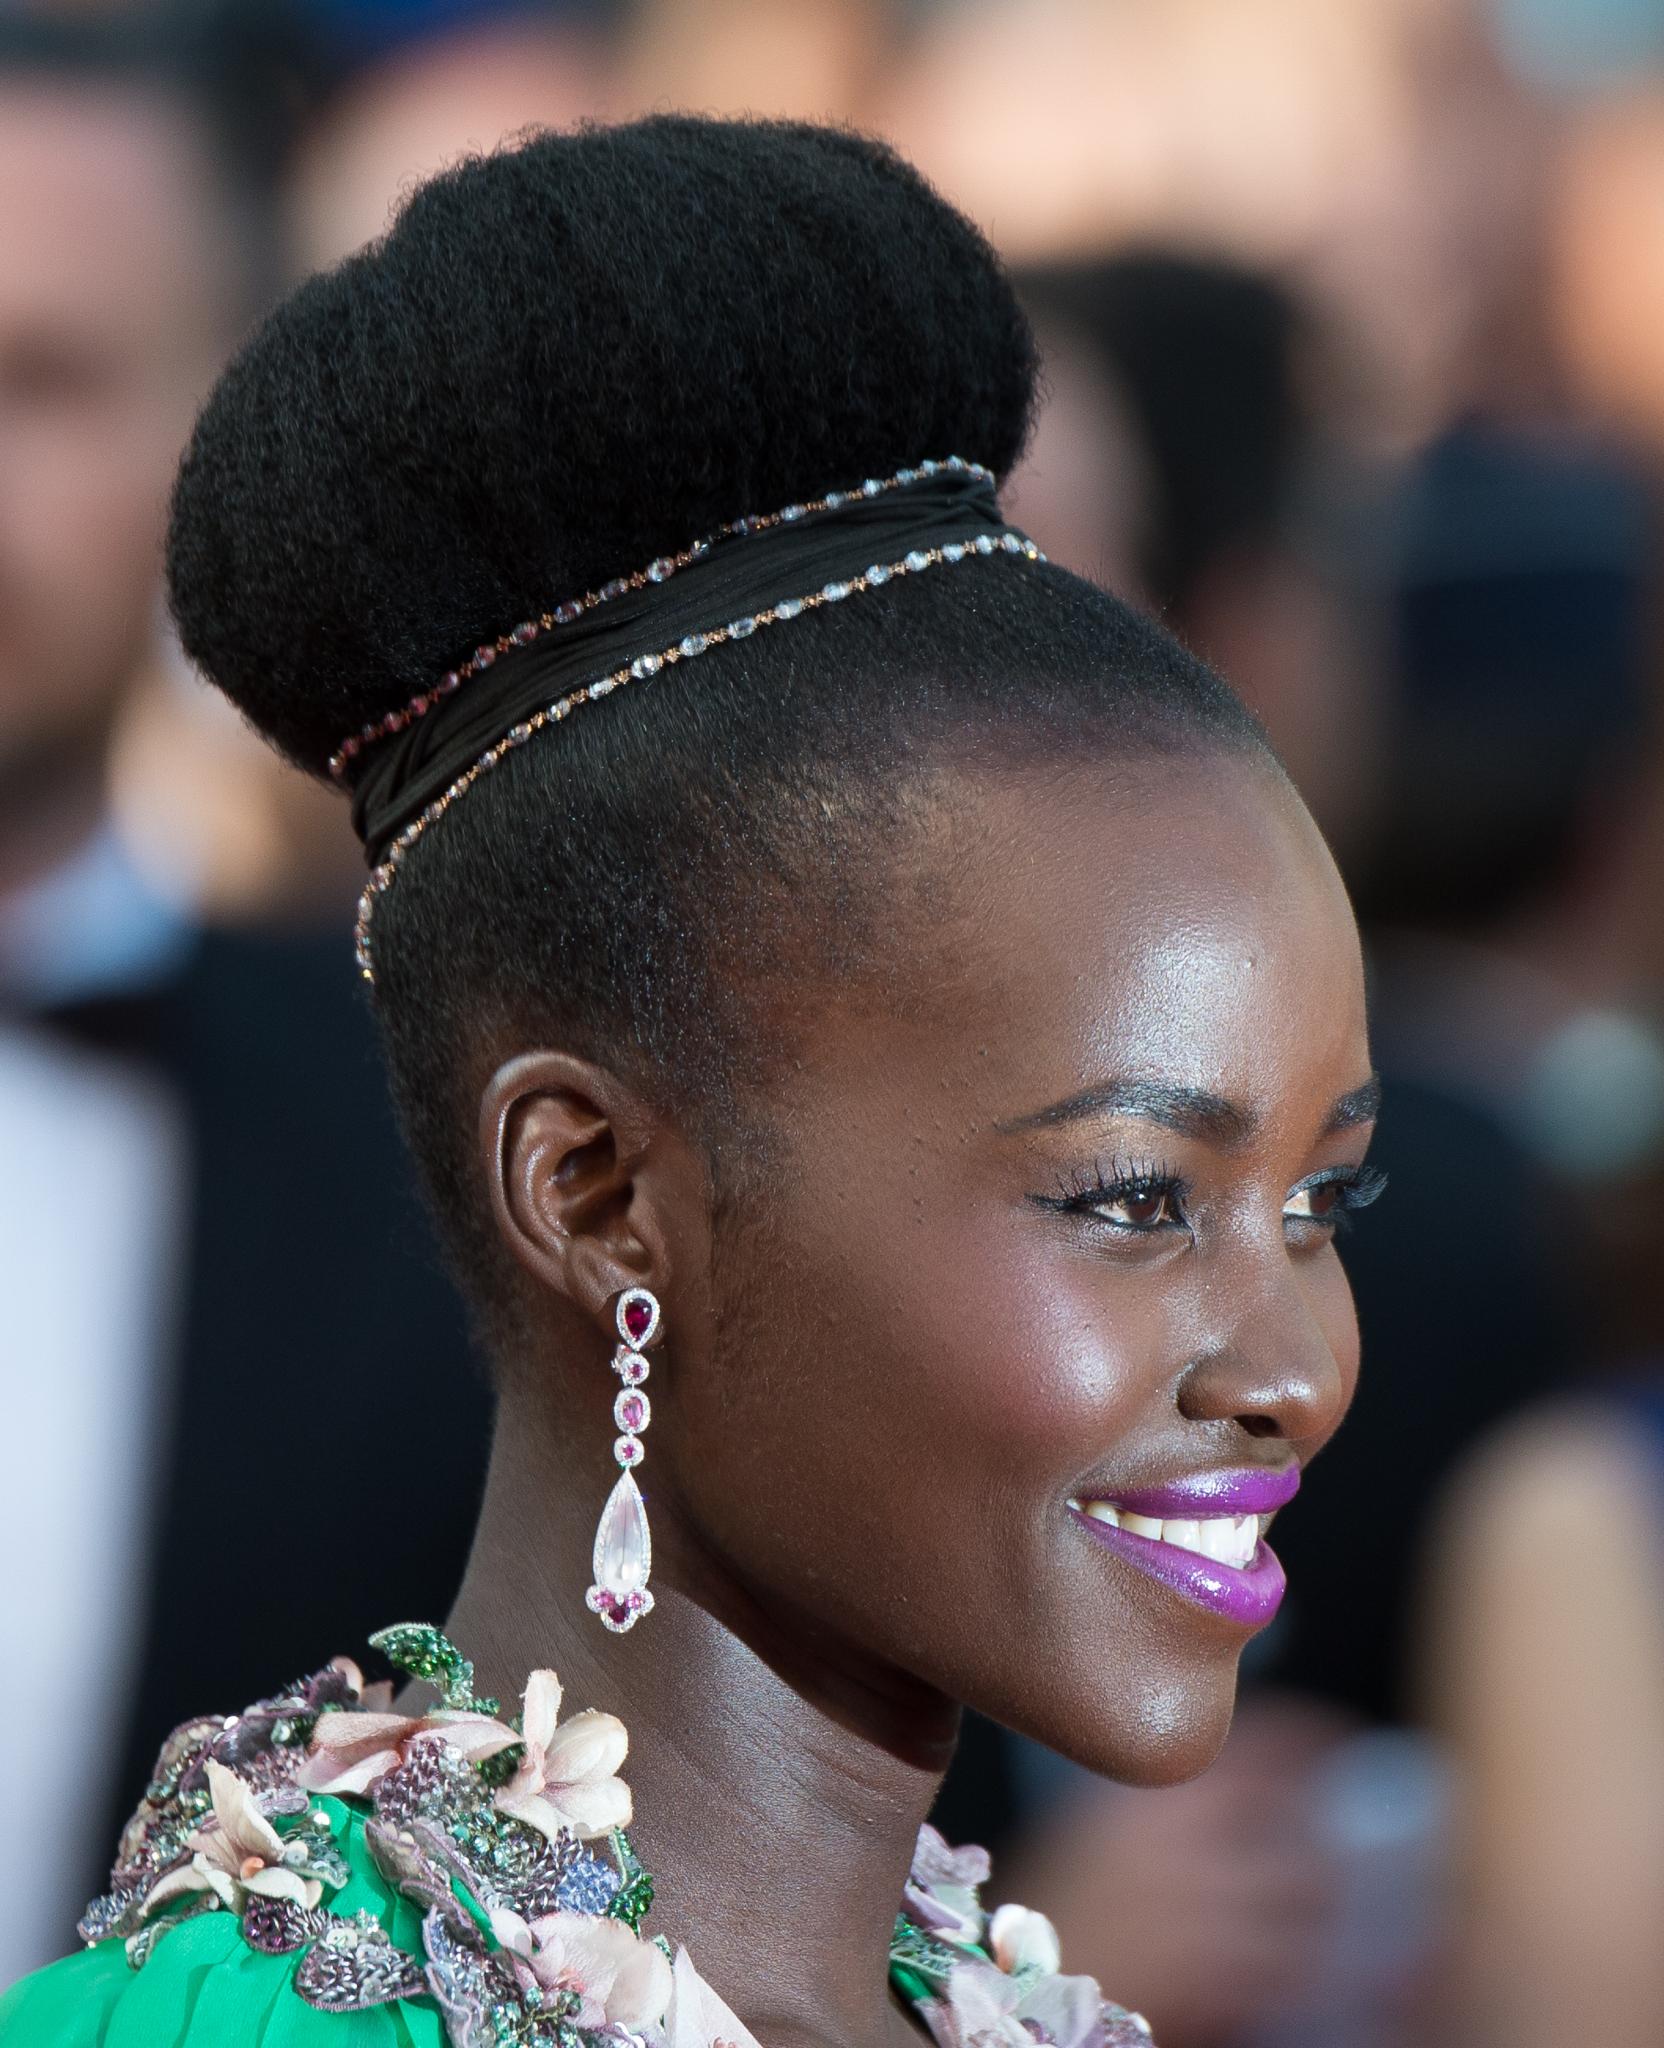 Best Looks from the Cannes Film Festival 2015
